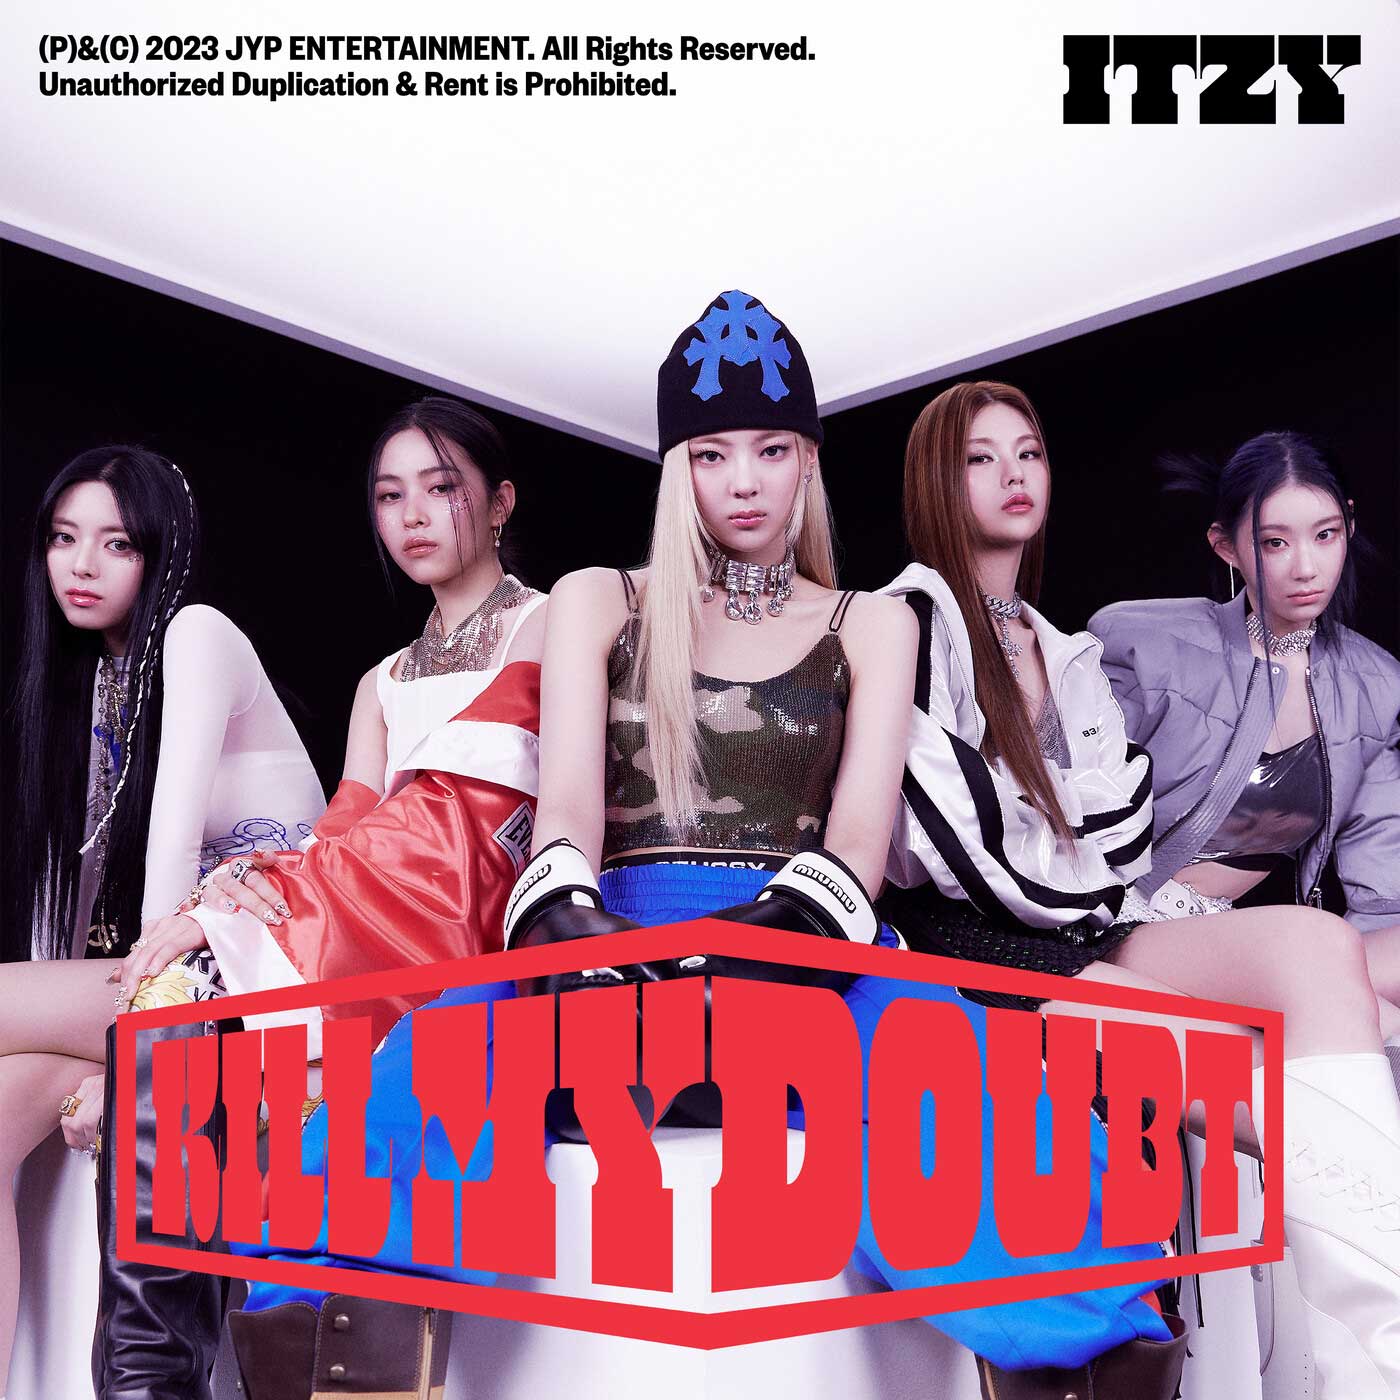 Album review: ITZY delivers a diversity of distinct sounds in